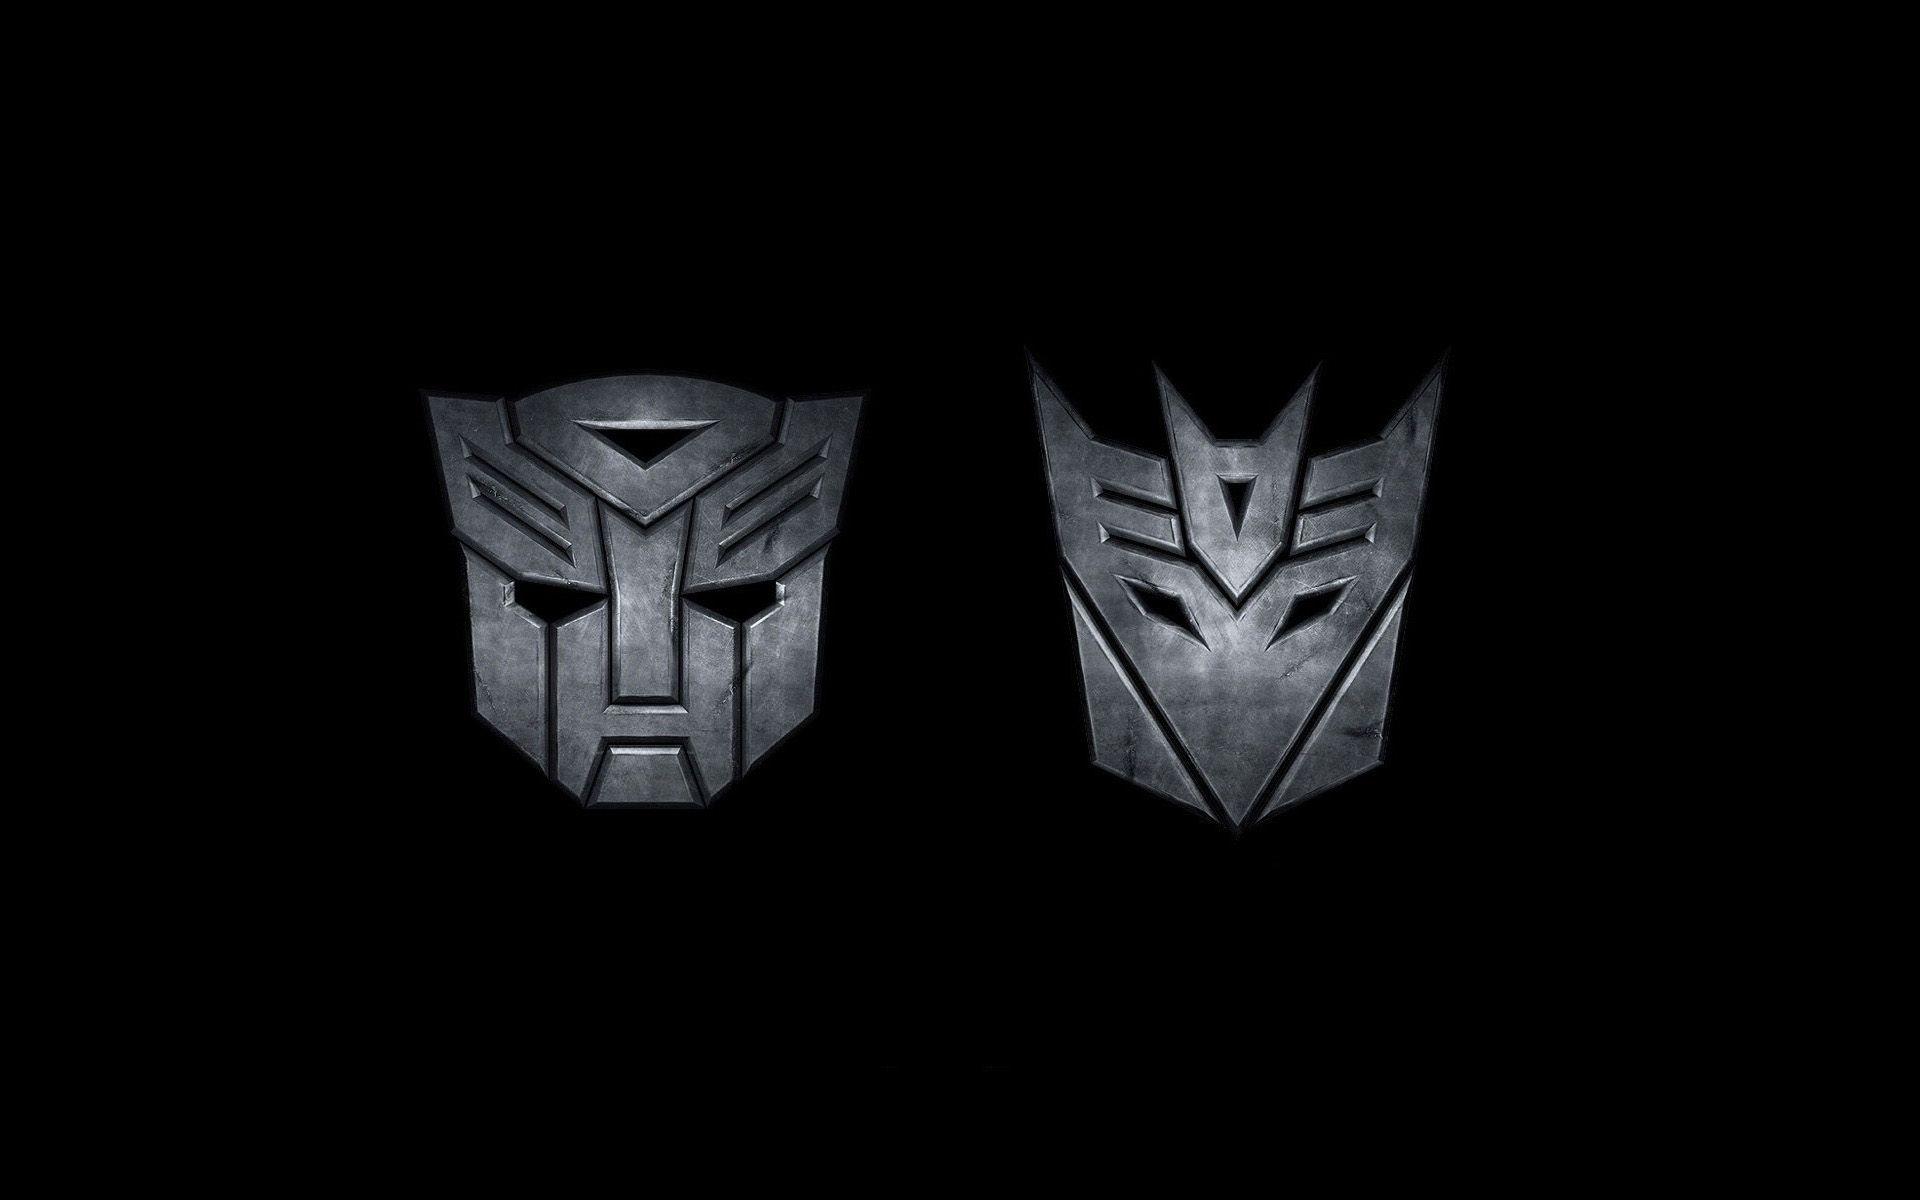 Transformers Wallpaper Collection 6 (1920 x 1200 pixels and other sizes)